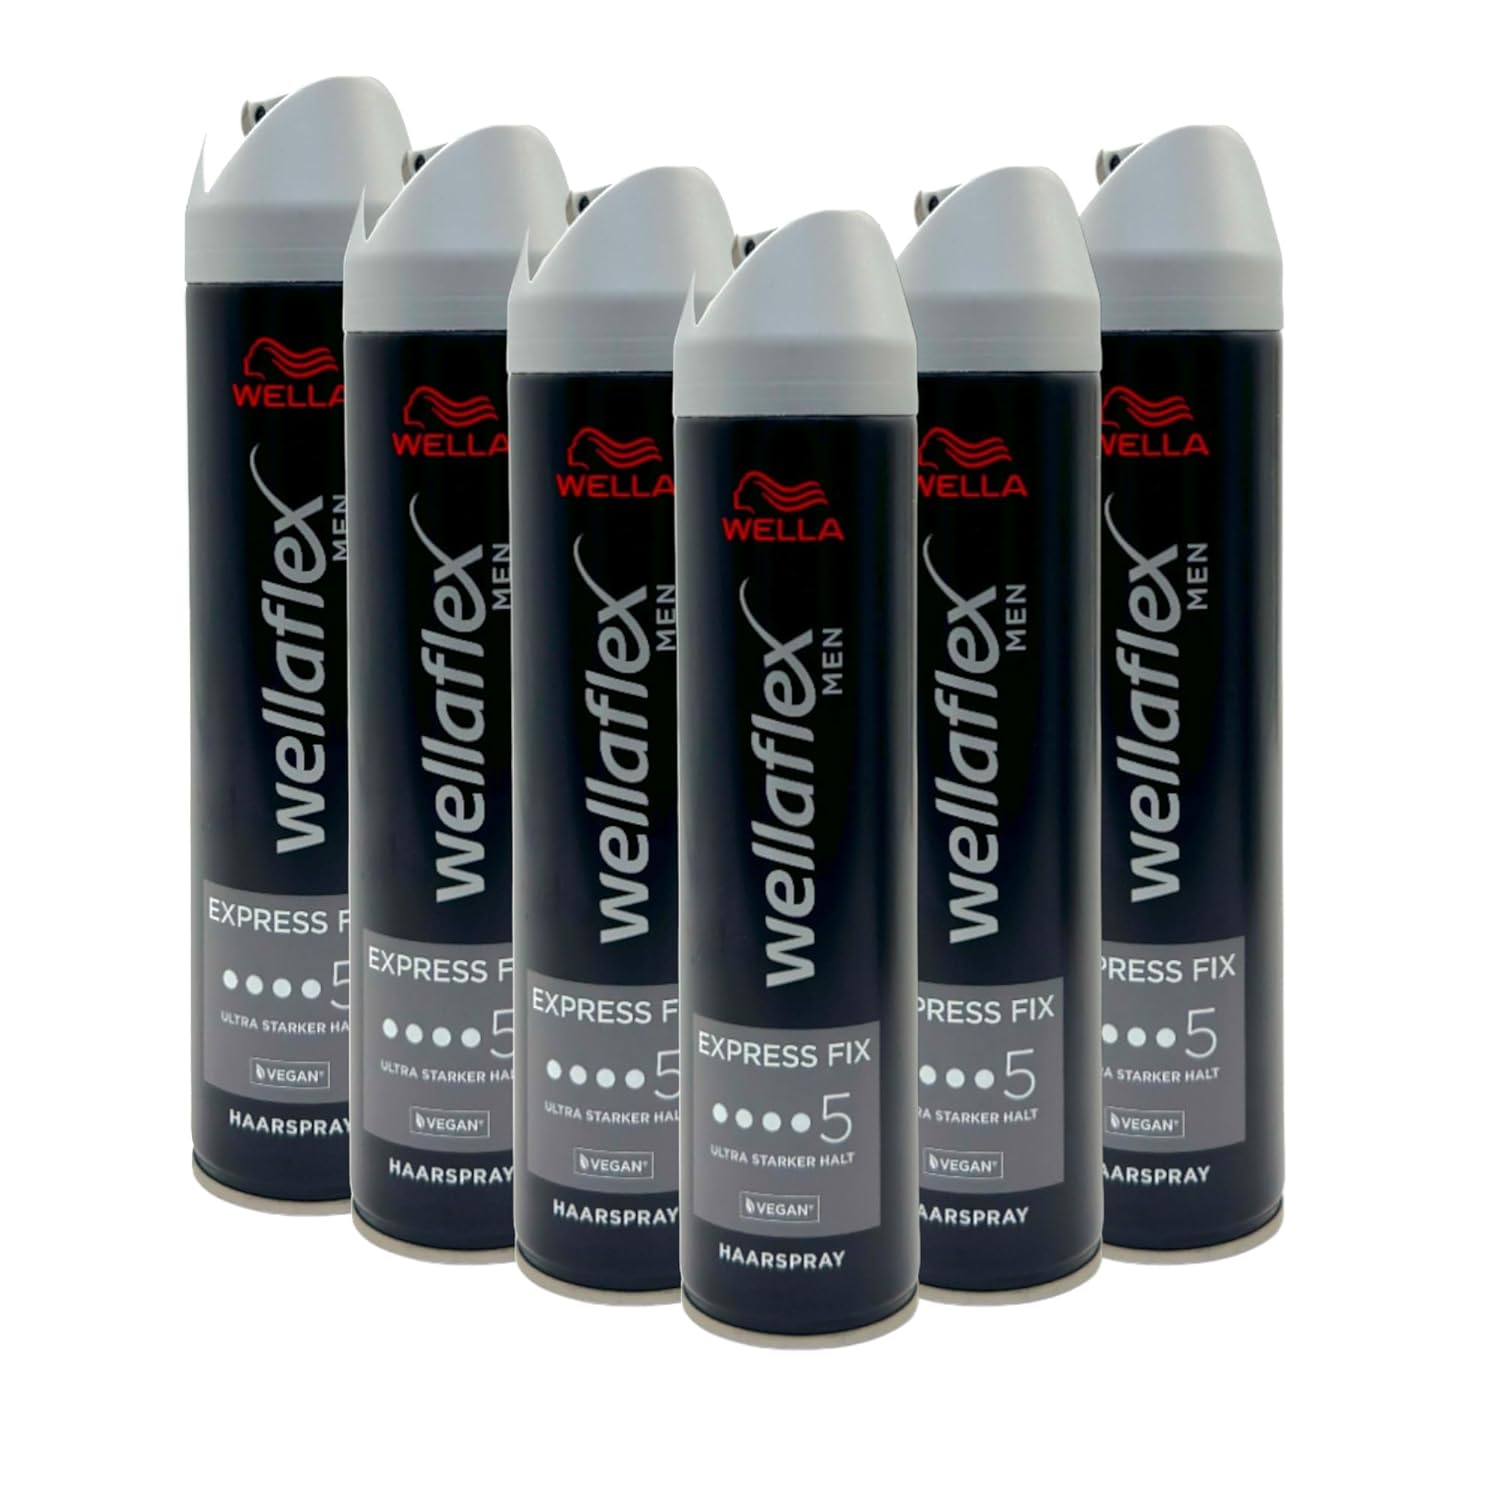 Wella Wellaflex Hair Spray Men Express Fix Ultra Strong Hold 250 ml | Hair Spray for Ultra Strong Hold | Maintains Style Up to 48h (Pack of 6)